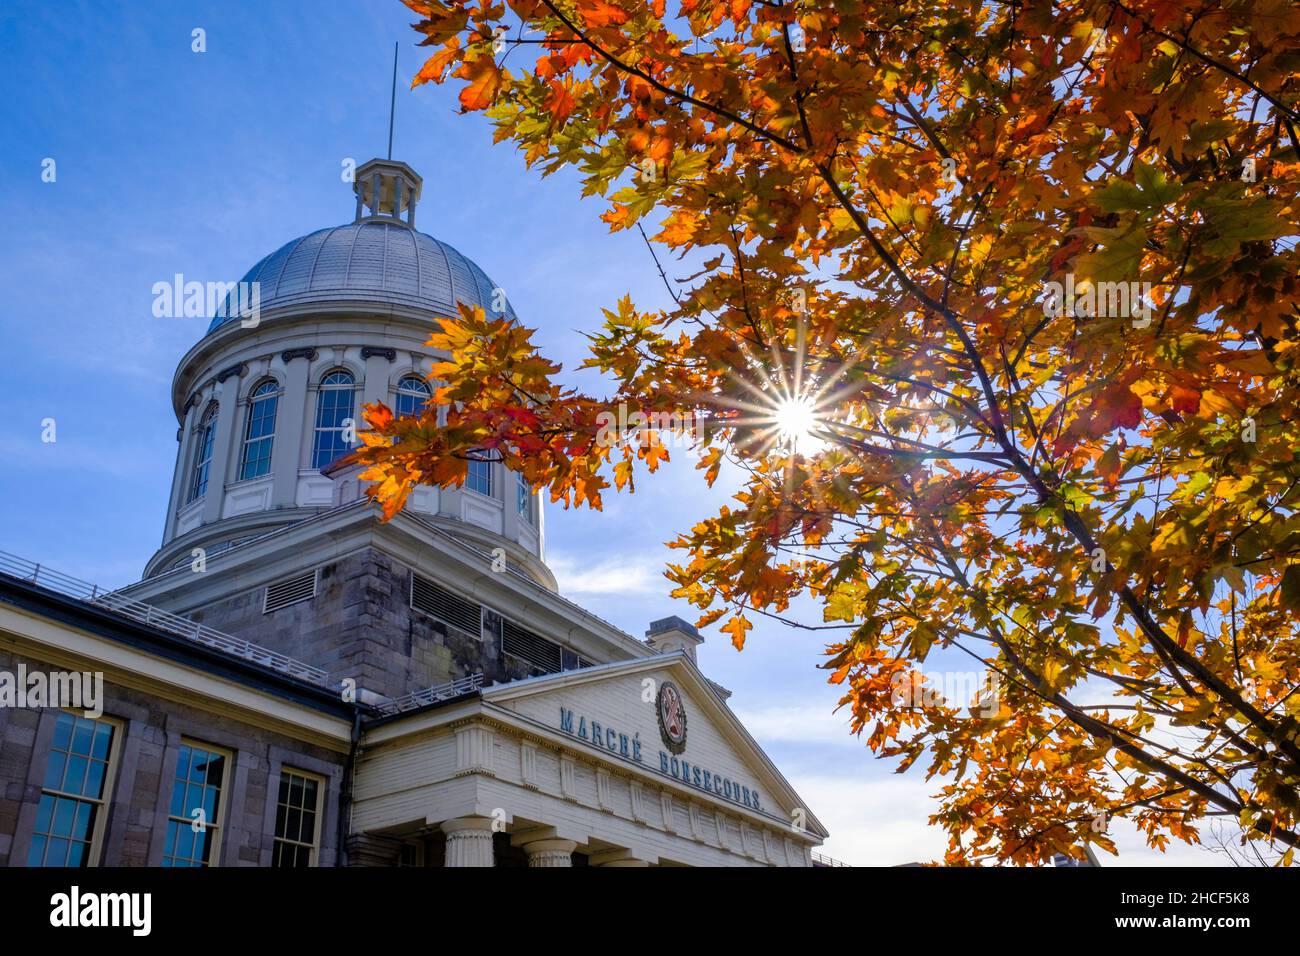 Dome and facade of Marché Bonsecours, Bonsecours Market, National Historic Site of Canada in the Fall, Vieux Montreal, Quebec, Canada Stock Photo